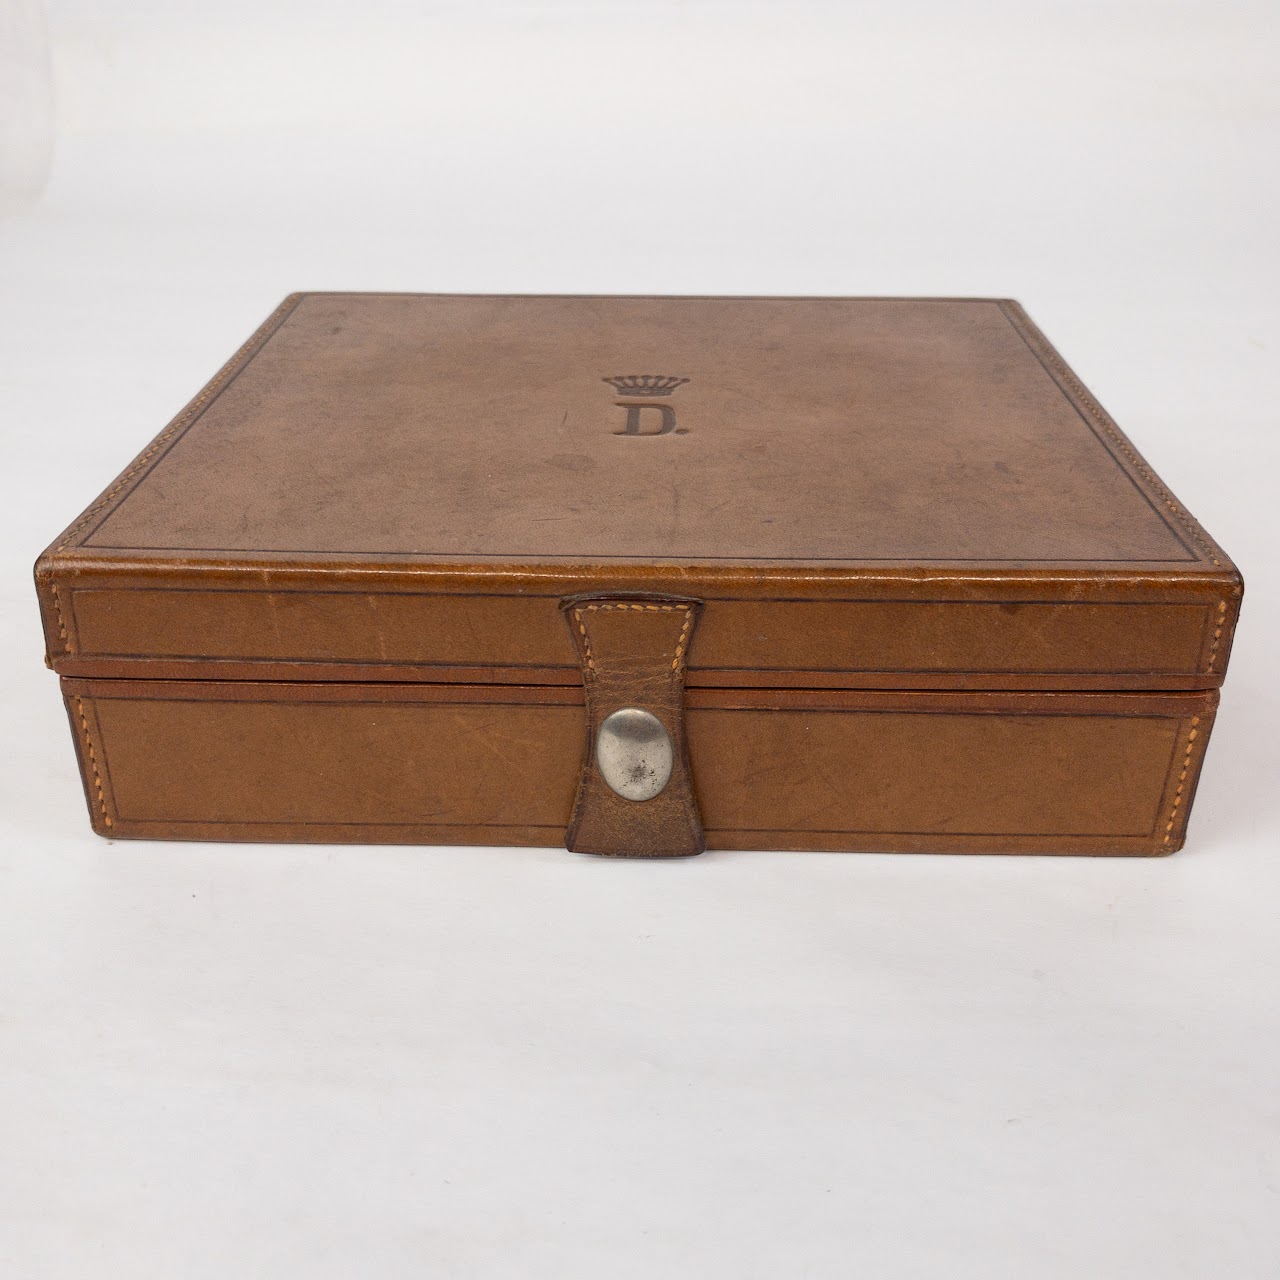 Vintage Leather Box with Handkerchiefs